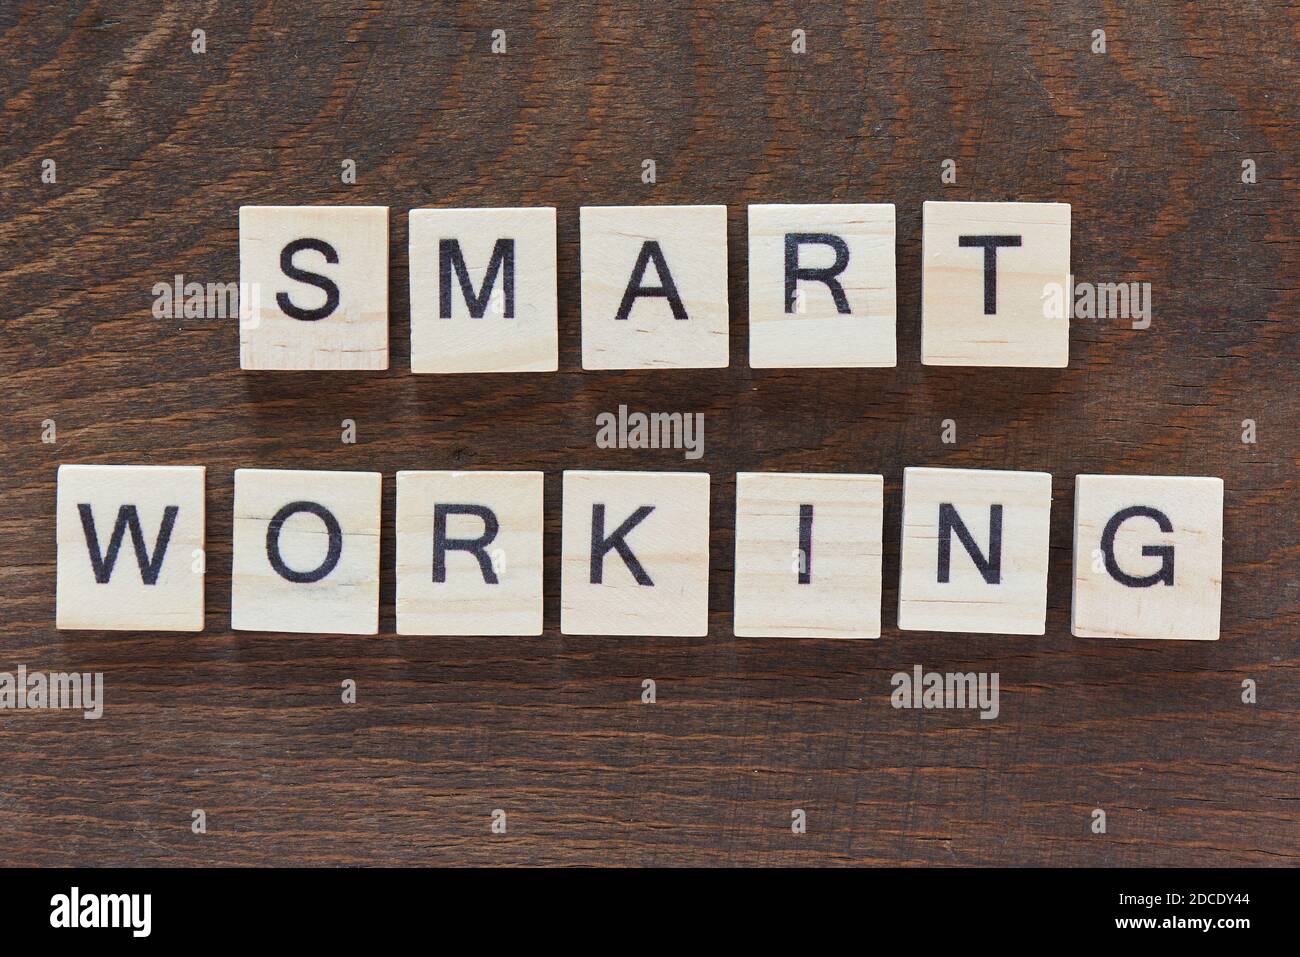 written 'SMART WORKING' with light wood letters on dark wood Stock Photo